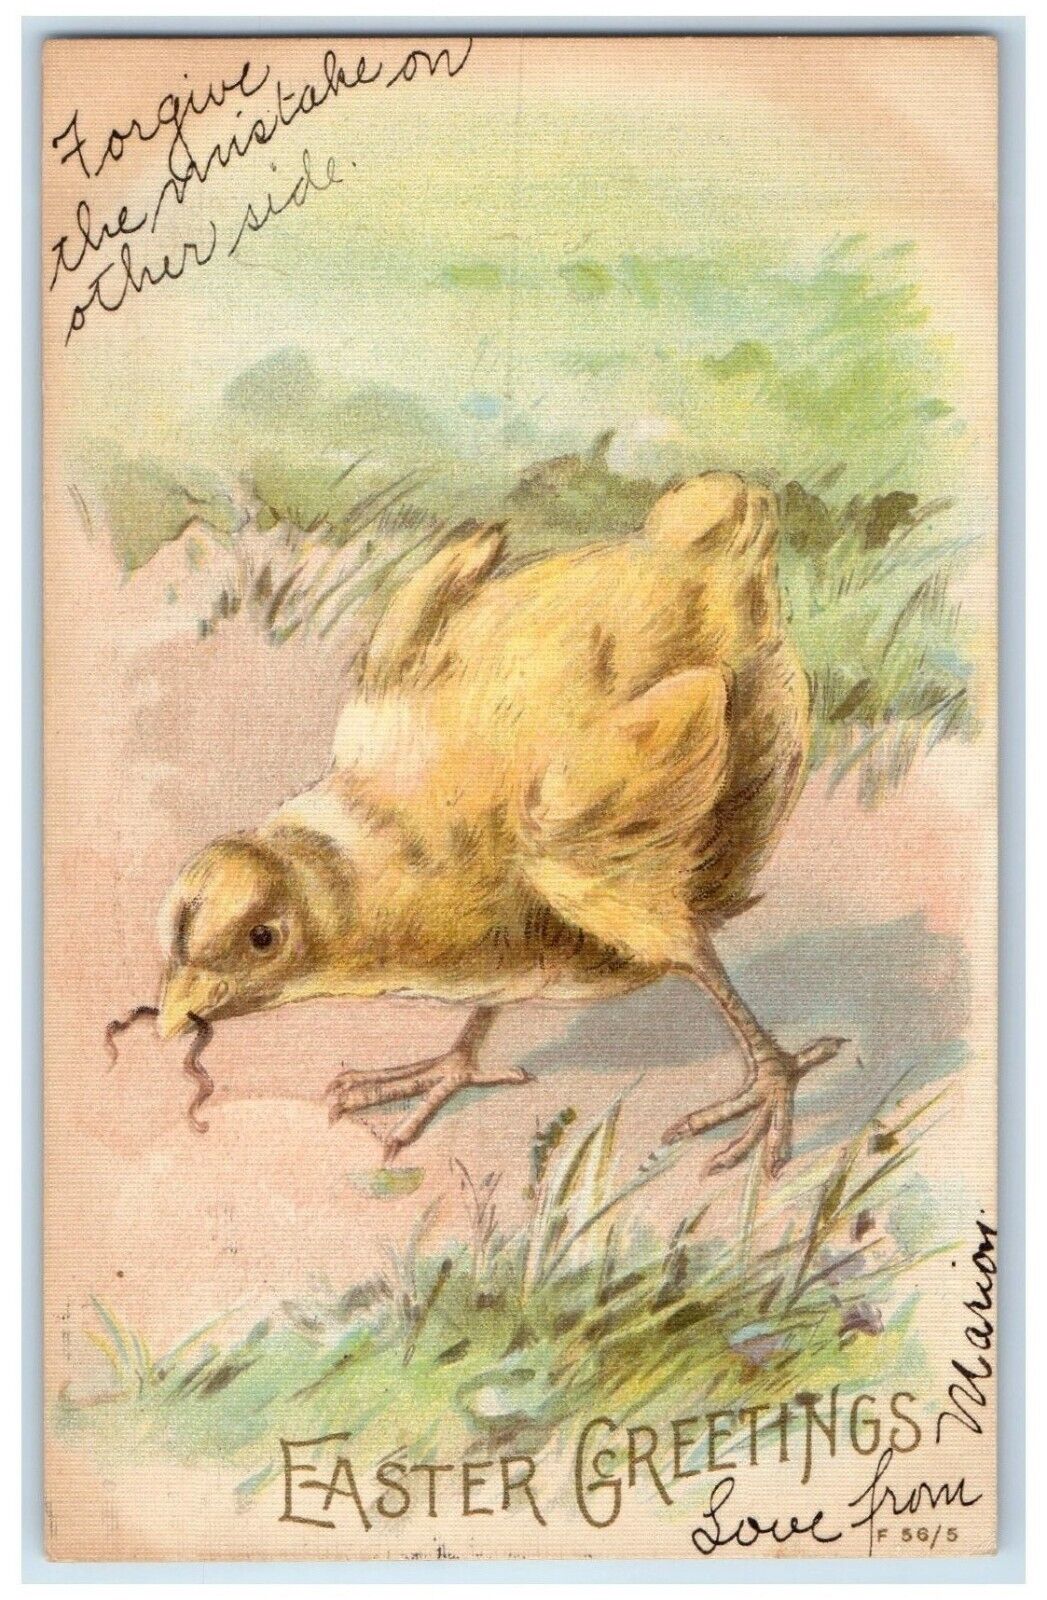 1907 Easter Greetings Chick Eating Worm Wallkill New York NY Rotograph Postcard